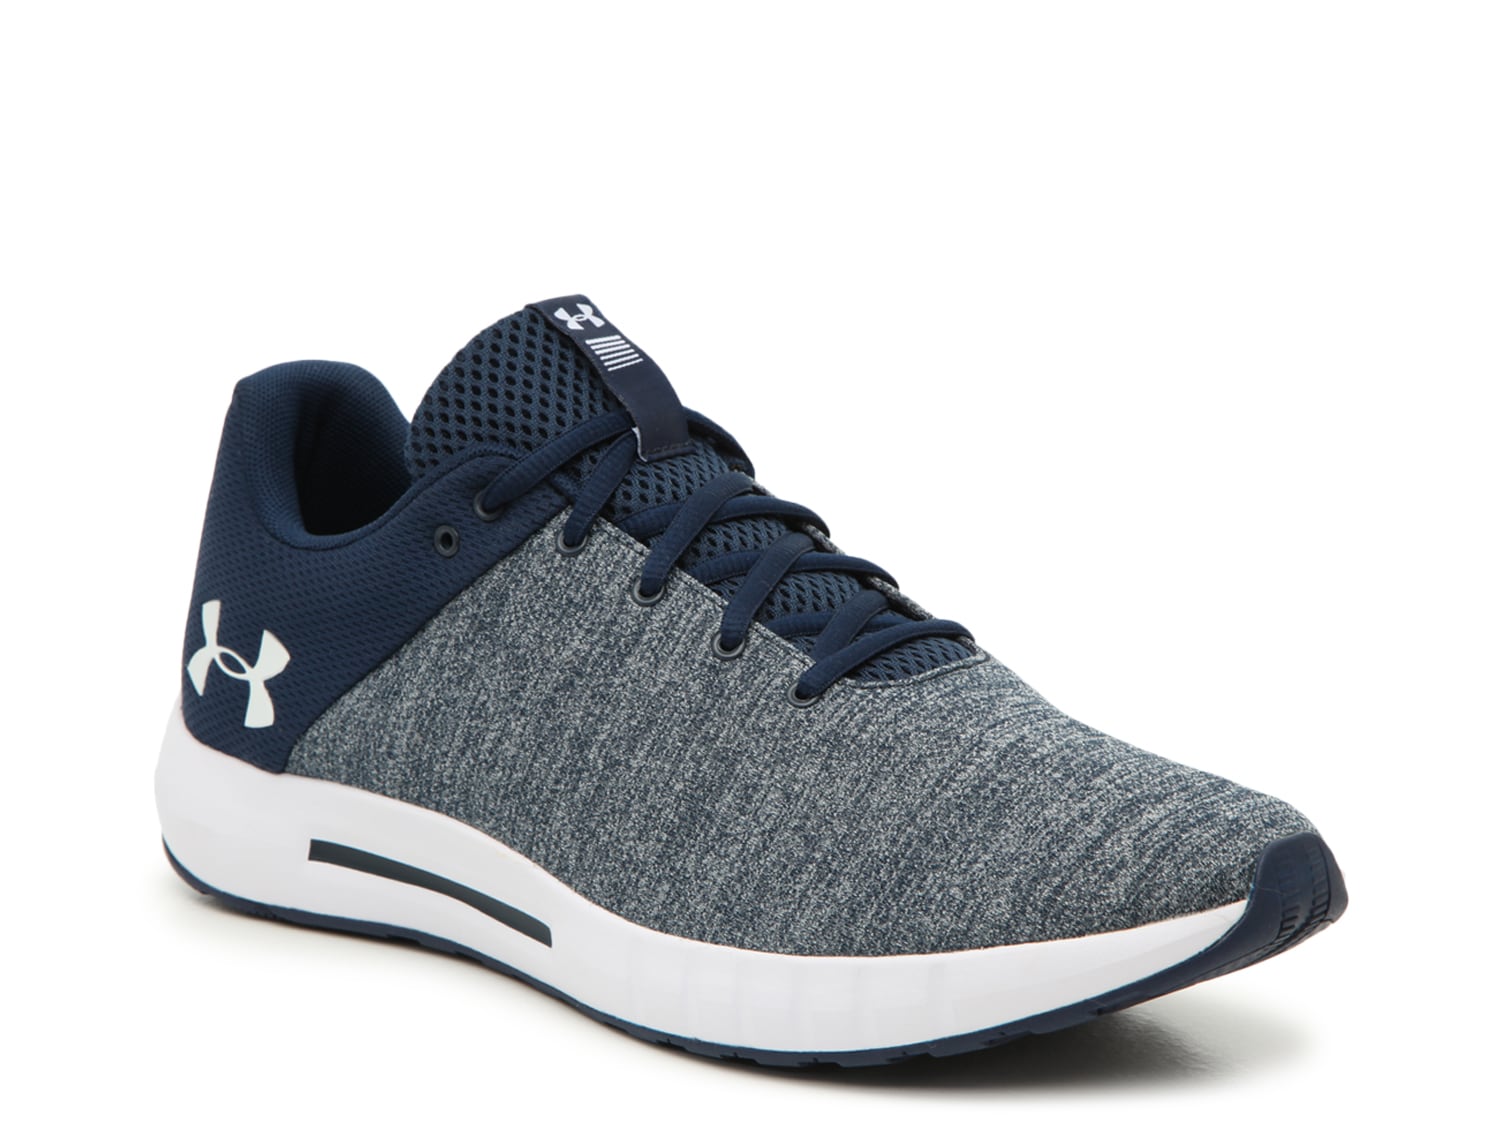 Under Armour Micro G Pursuit Lightweight Running Shoe - - Free Shipping | DSW